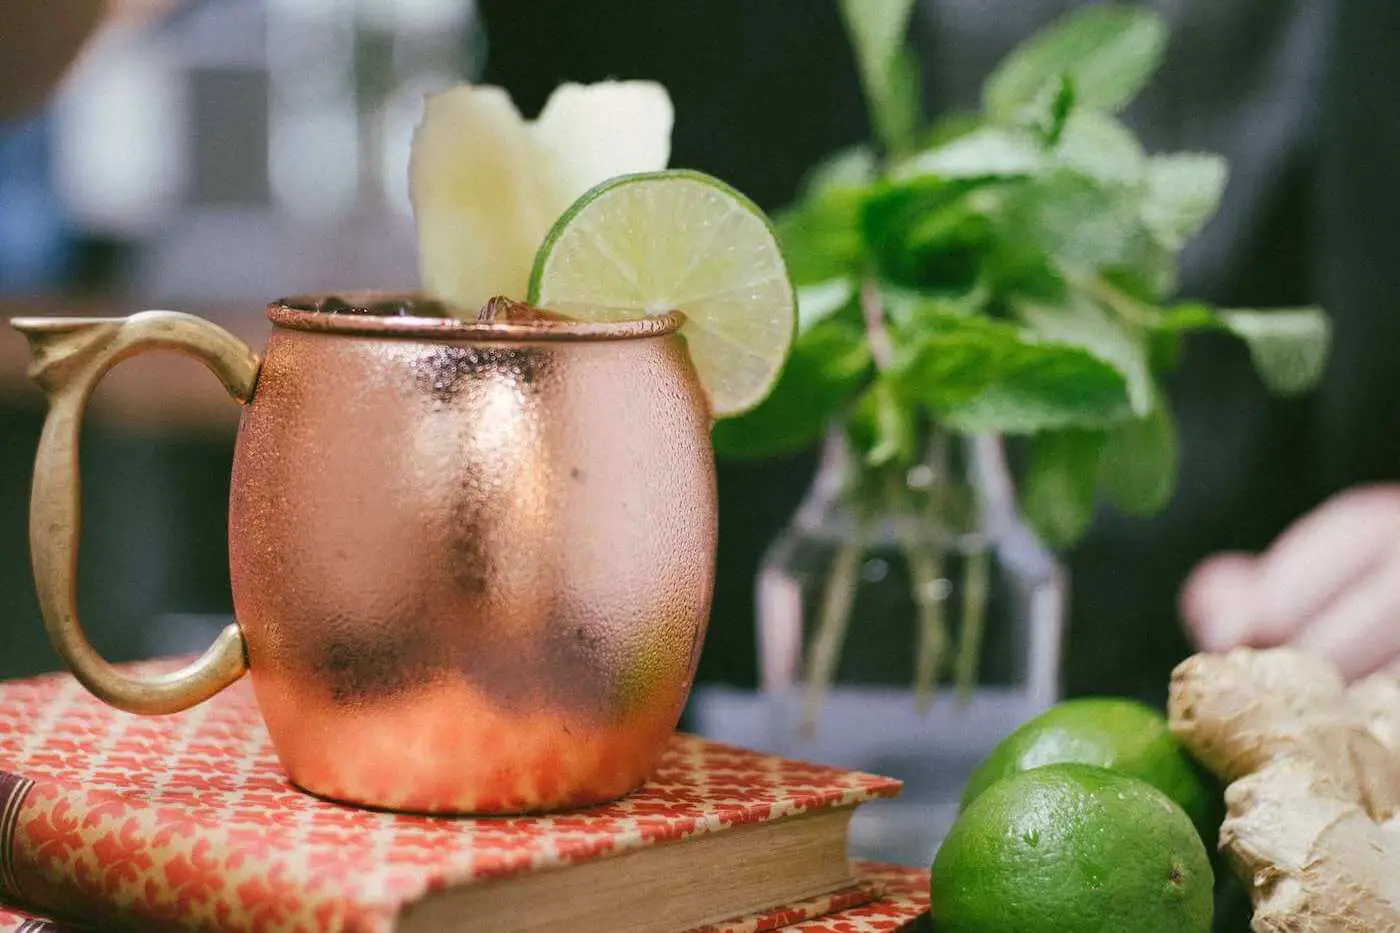 Bartender topping-off a moscow mule with mint garnish.